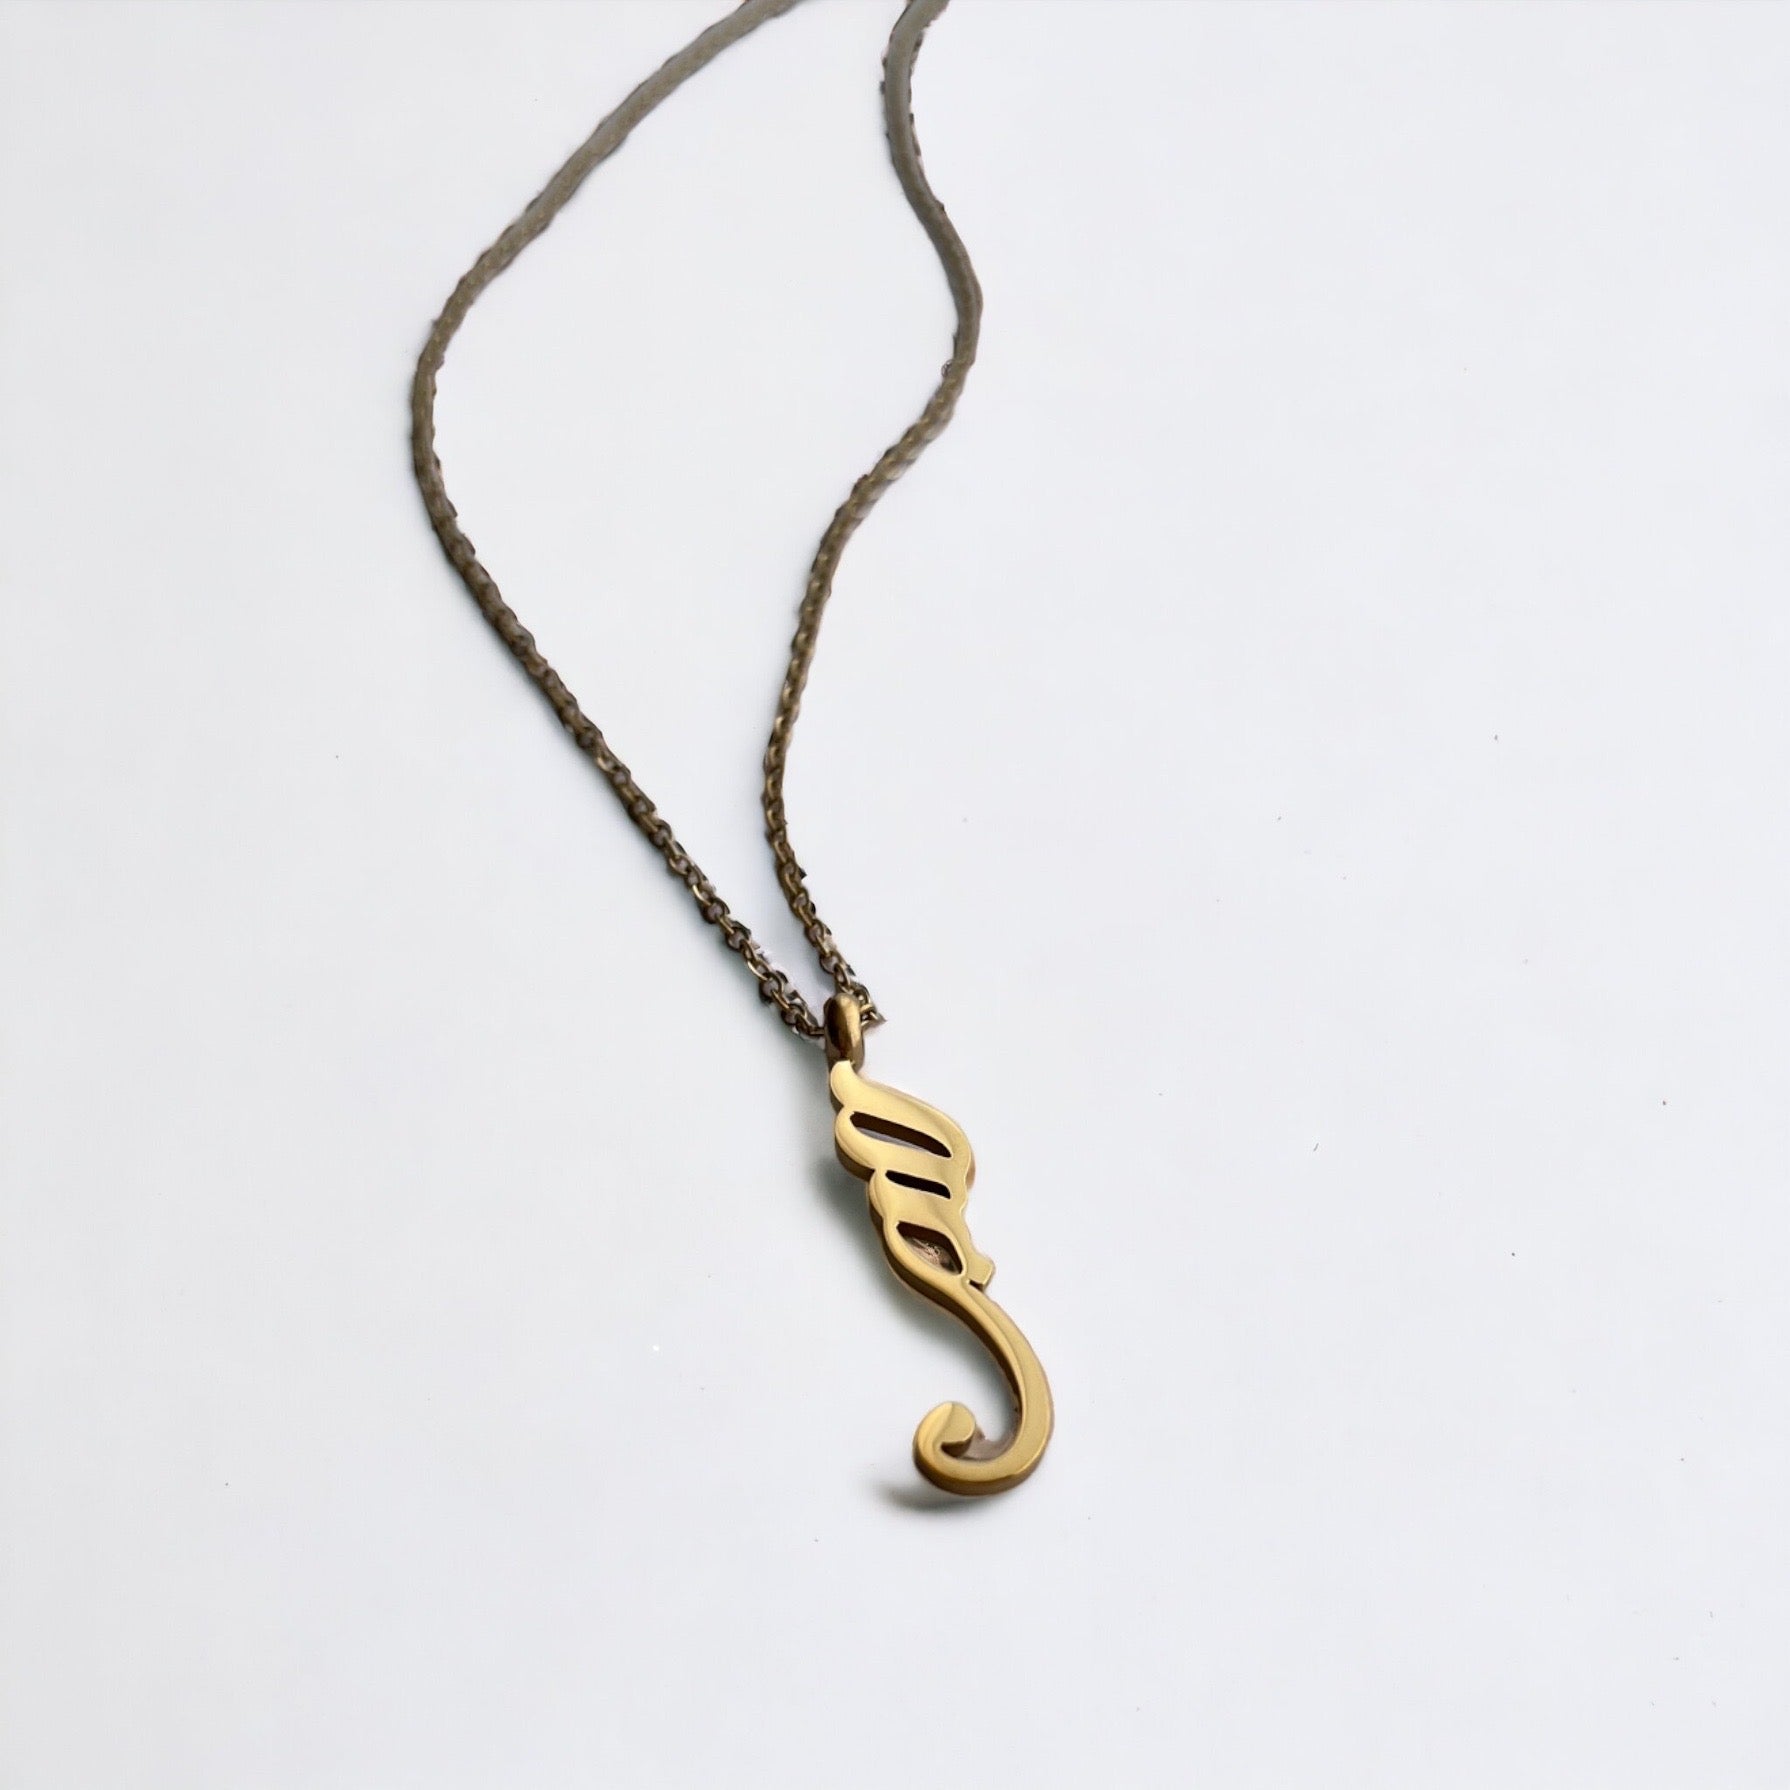 Sabr Calligraphy Necklace 18K Gold Plated